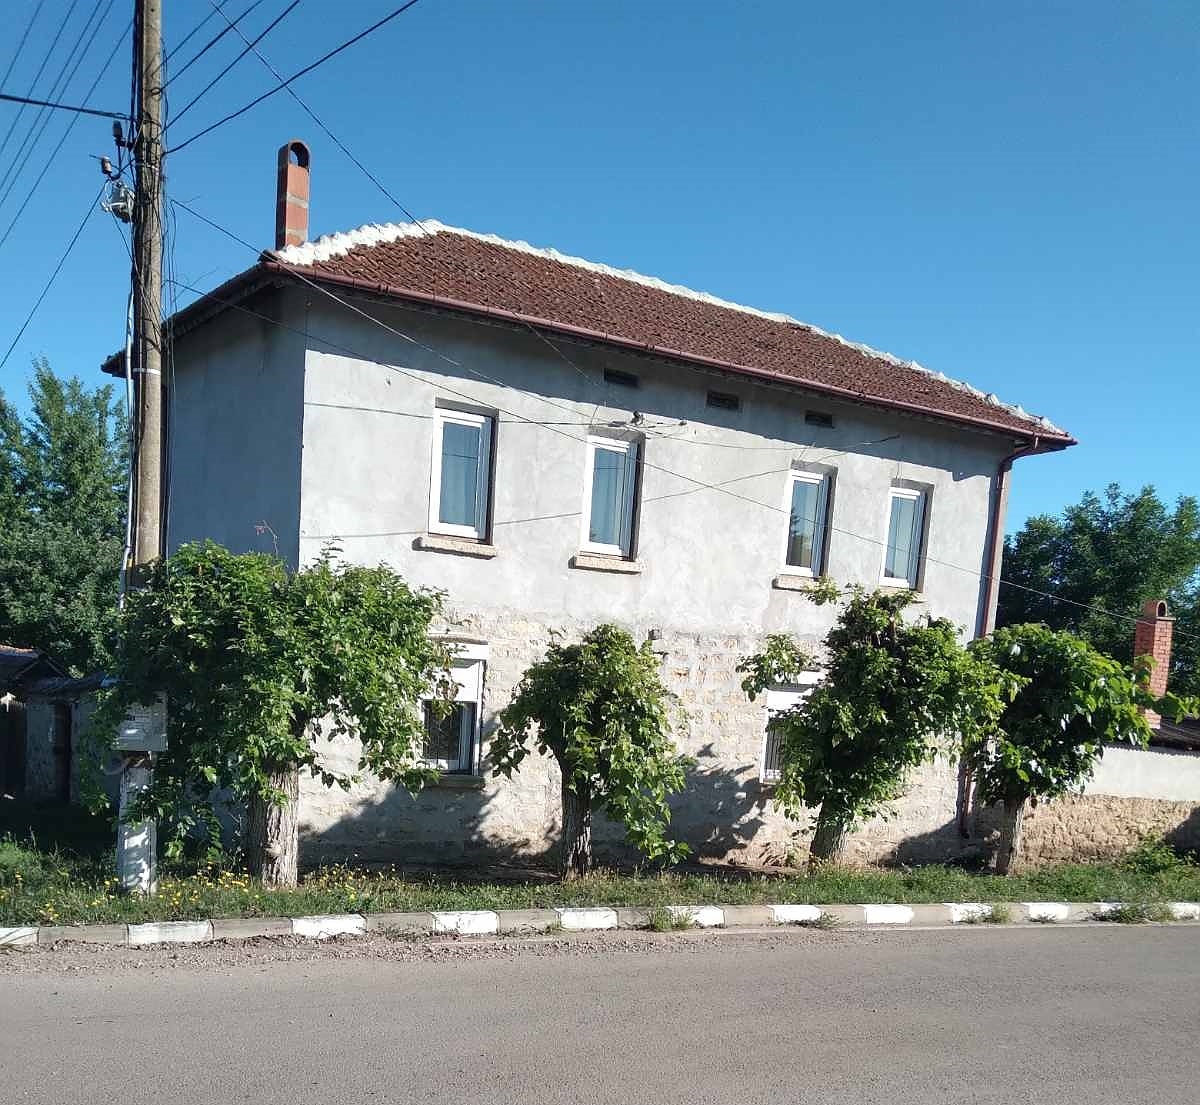 /partially-furnished-and-renovated-rural-house-with-plot-of-land-situated-in-a-big-village-near-river-55-km-northwest-of-vratsa-b/